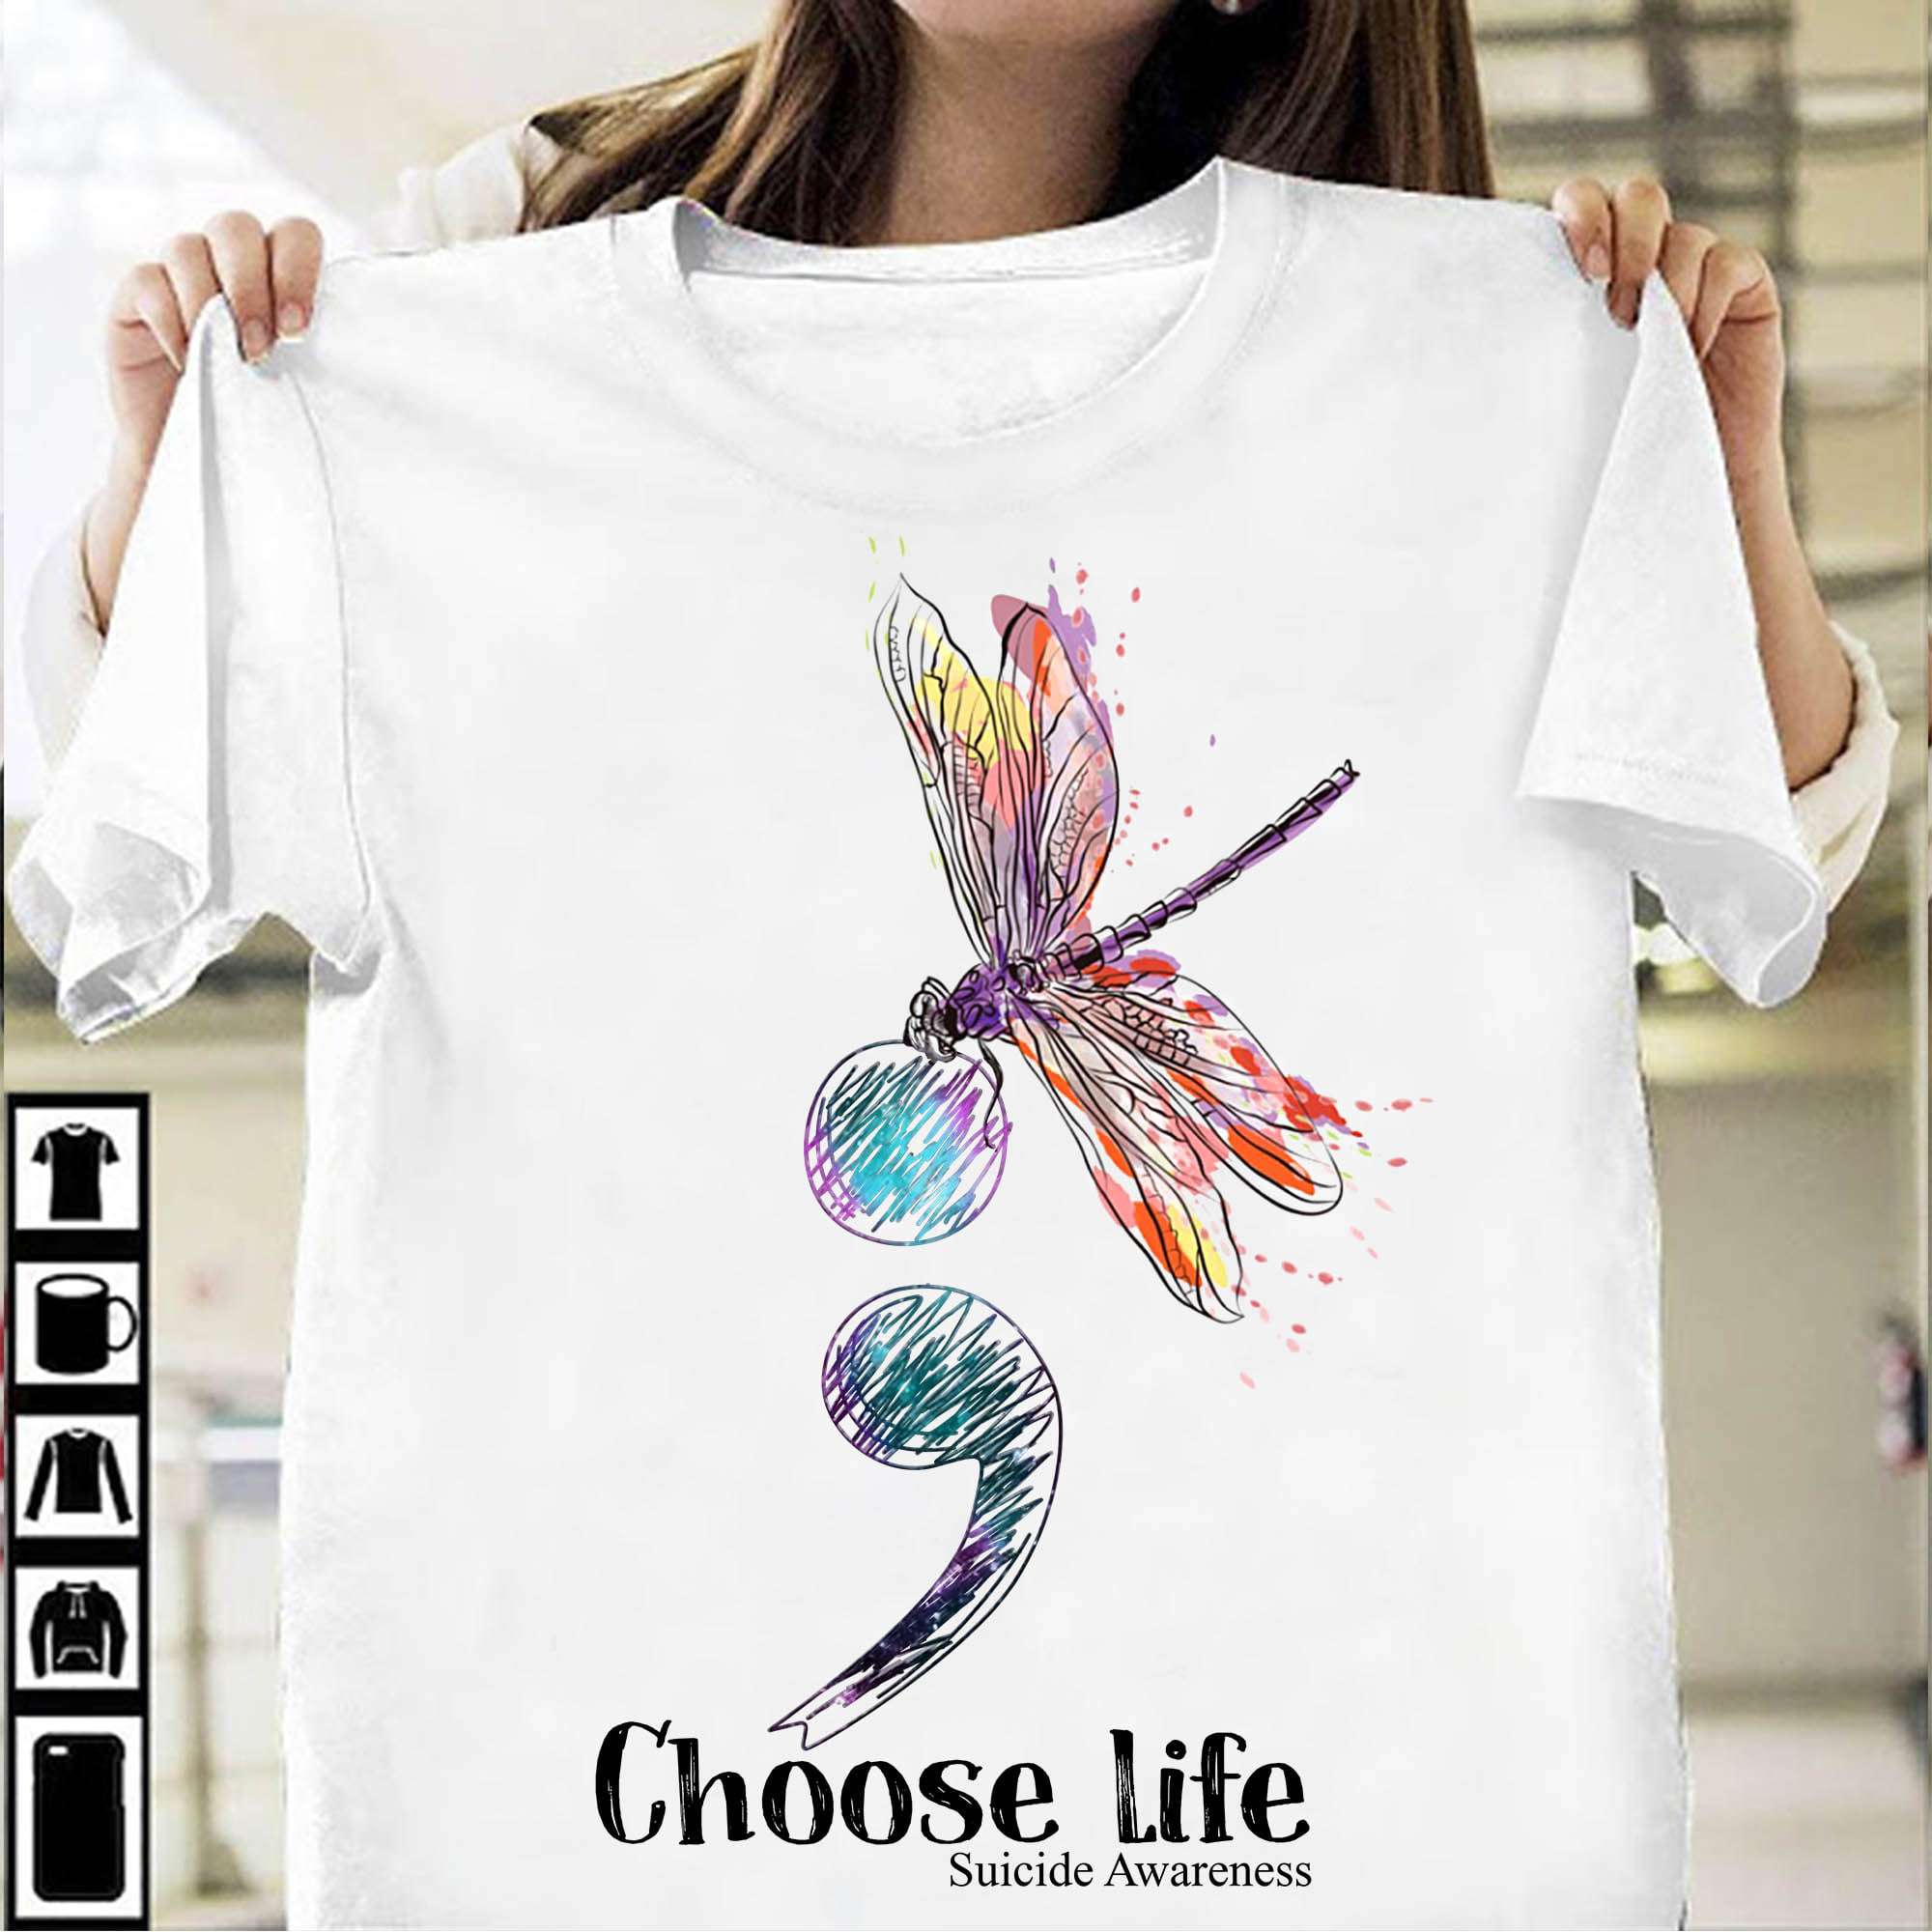 Suicide Dragonfly - Choose life suicide awareness